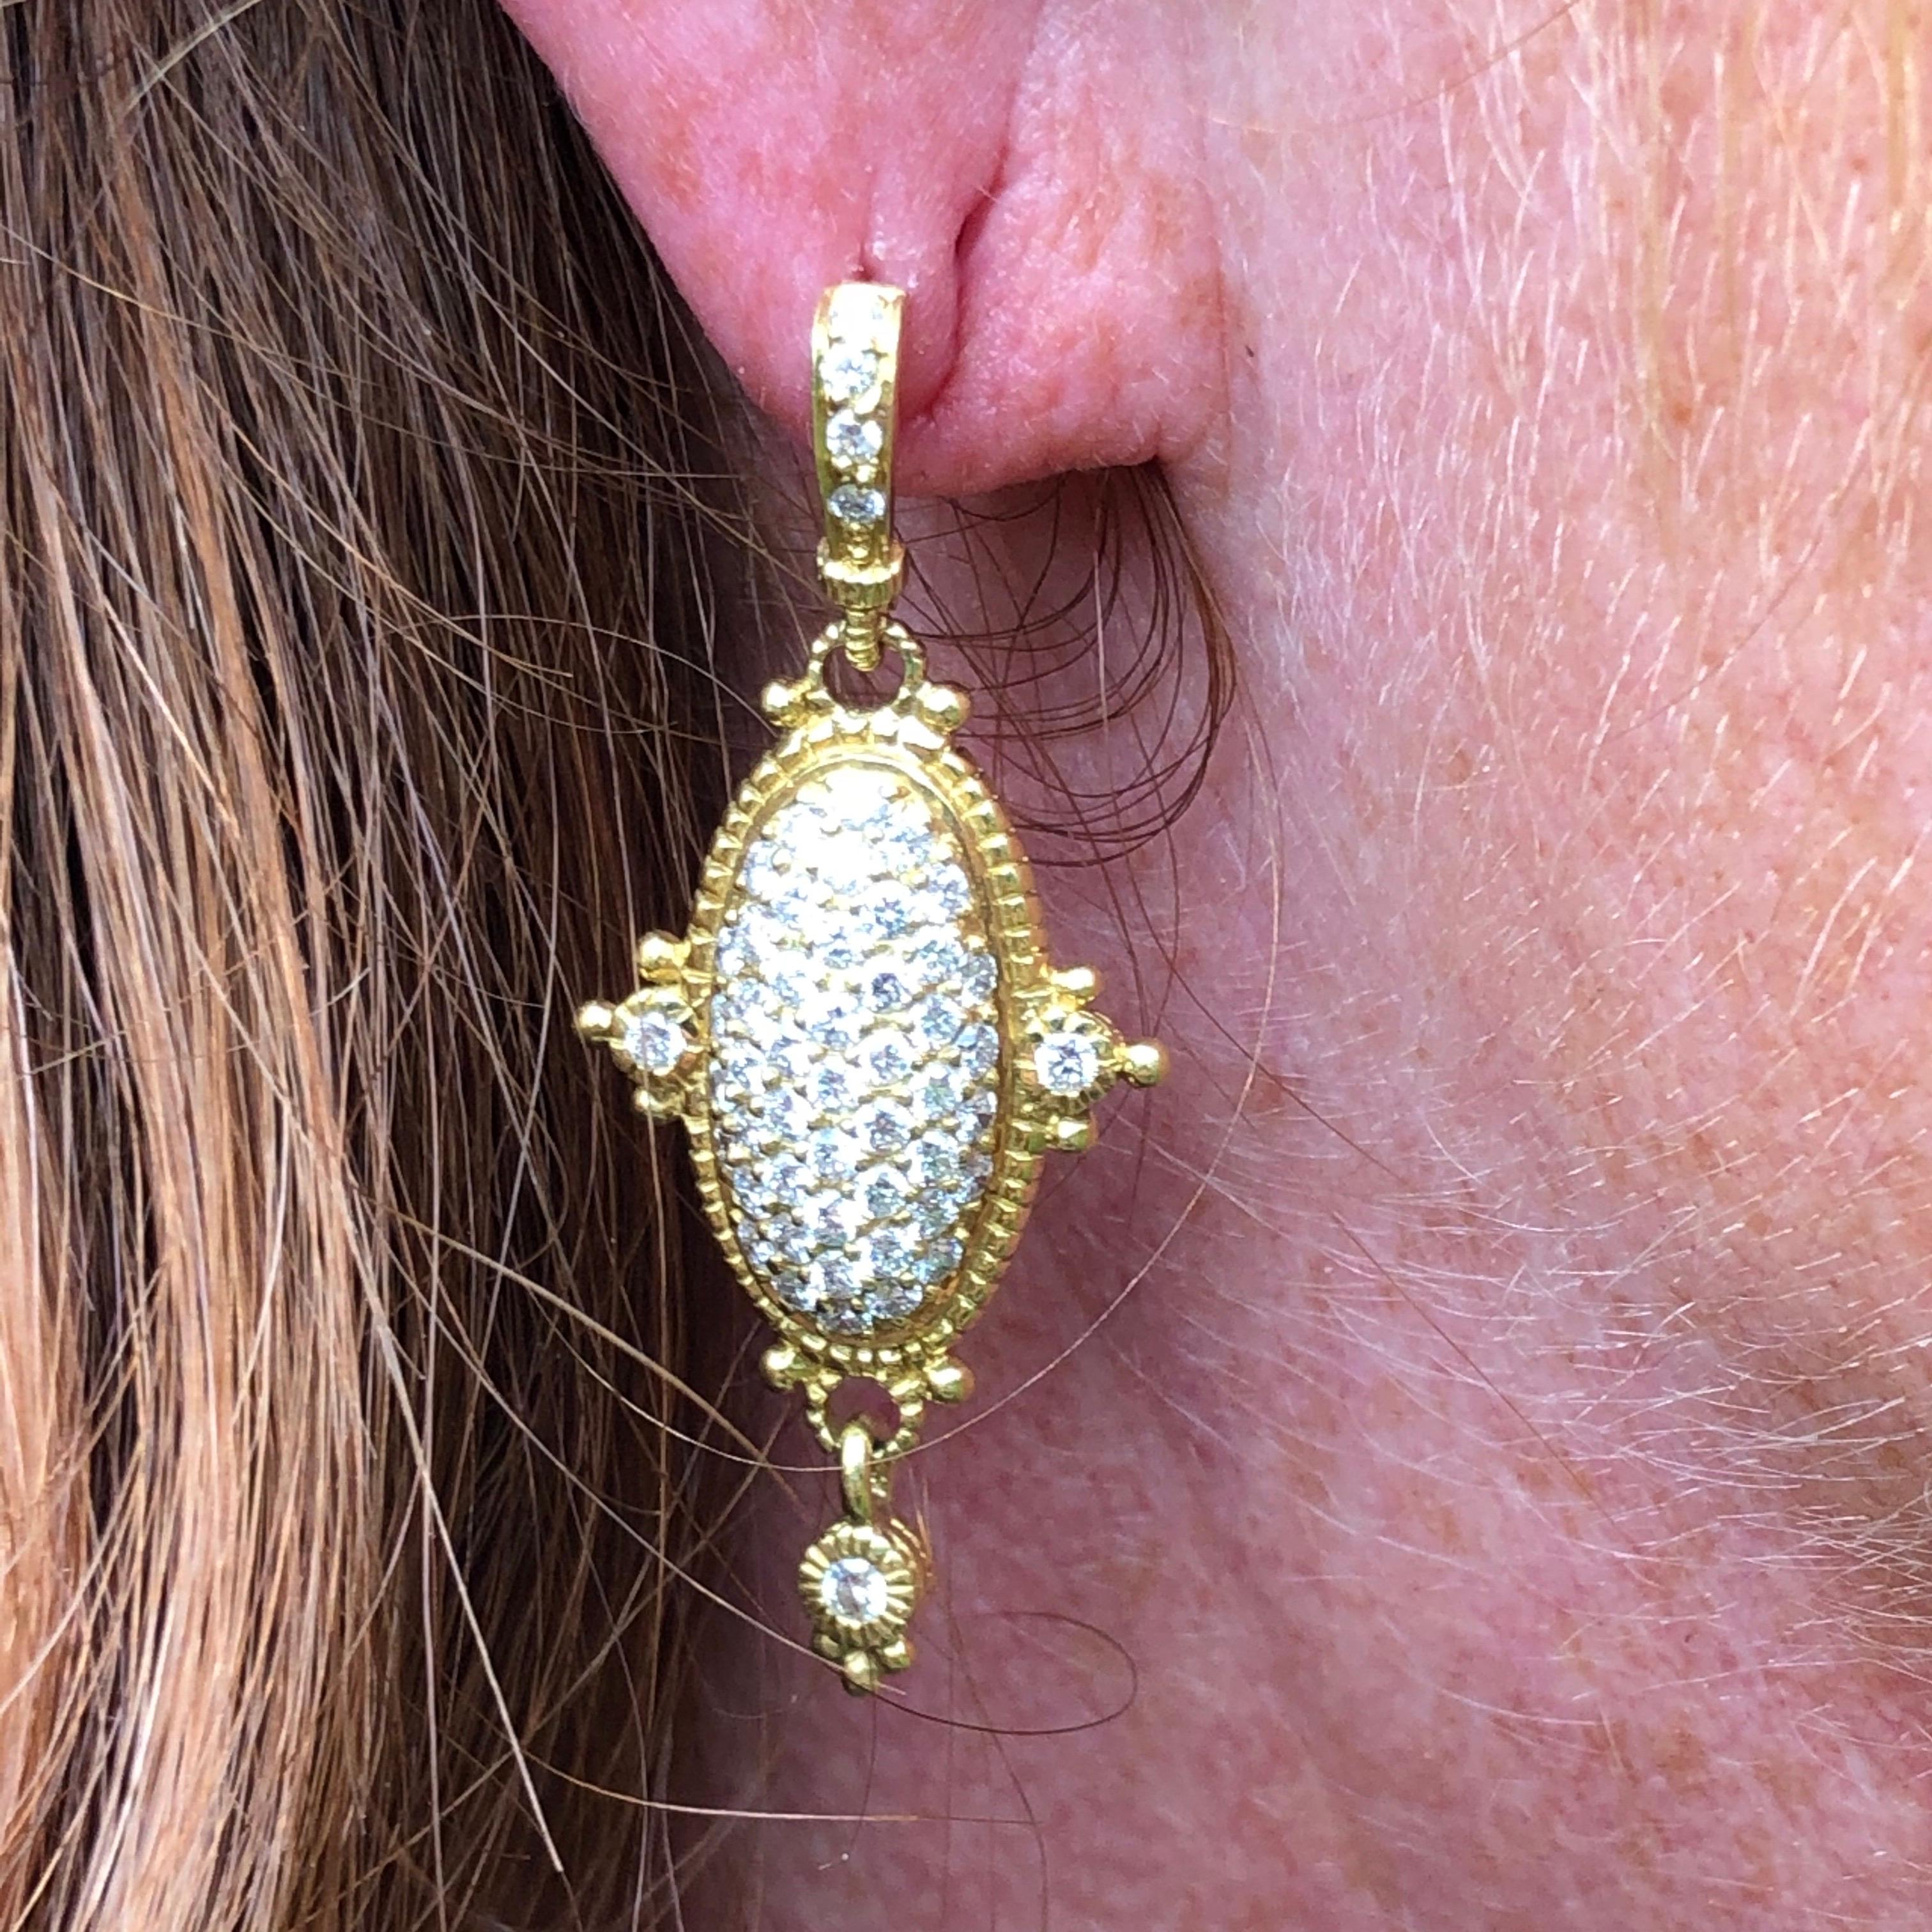 These delightful diamond encrusted Judith Ripka earrings hold so much sparkle and shine and the stones total 2ct.  The style has almost and Indian feel to them and the yellow gold is bright and glossy with so much detail. As well as the main panel